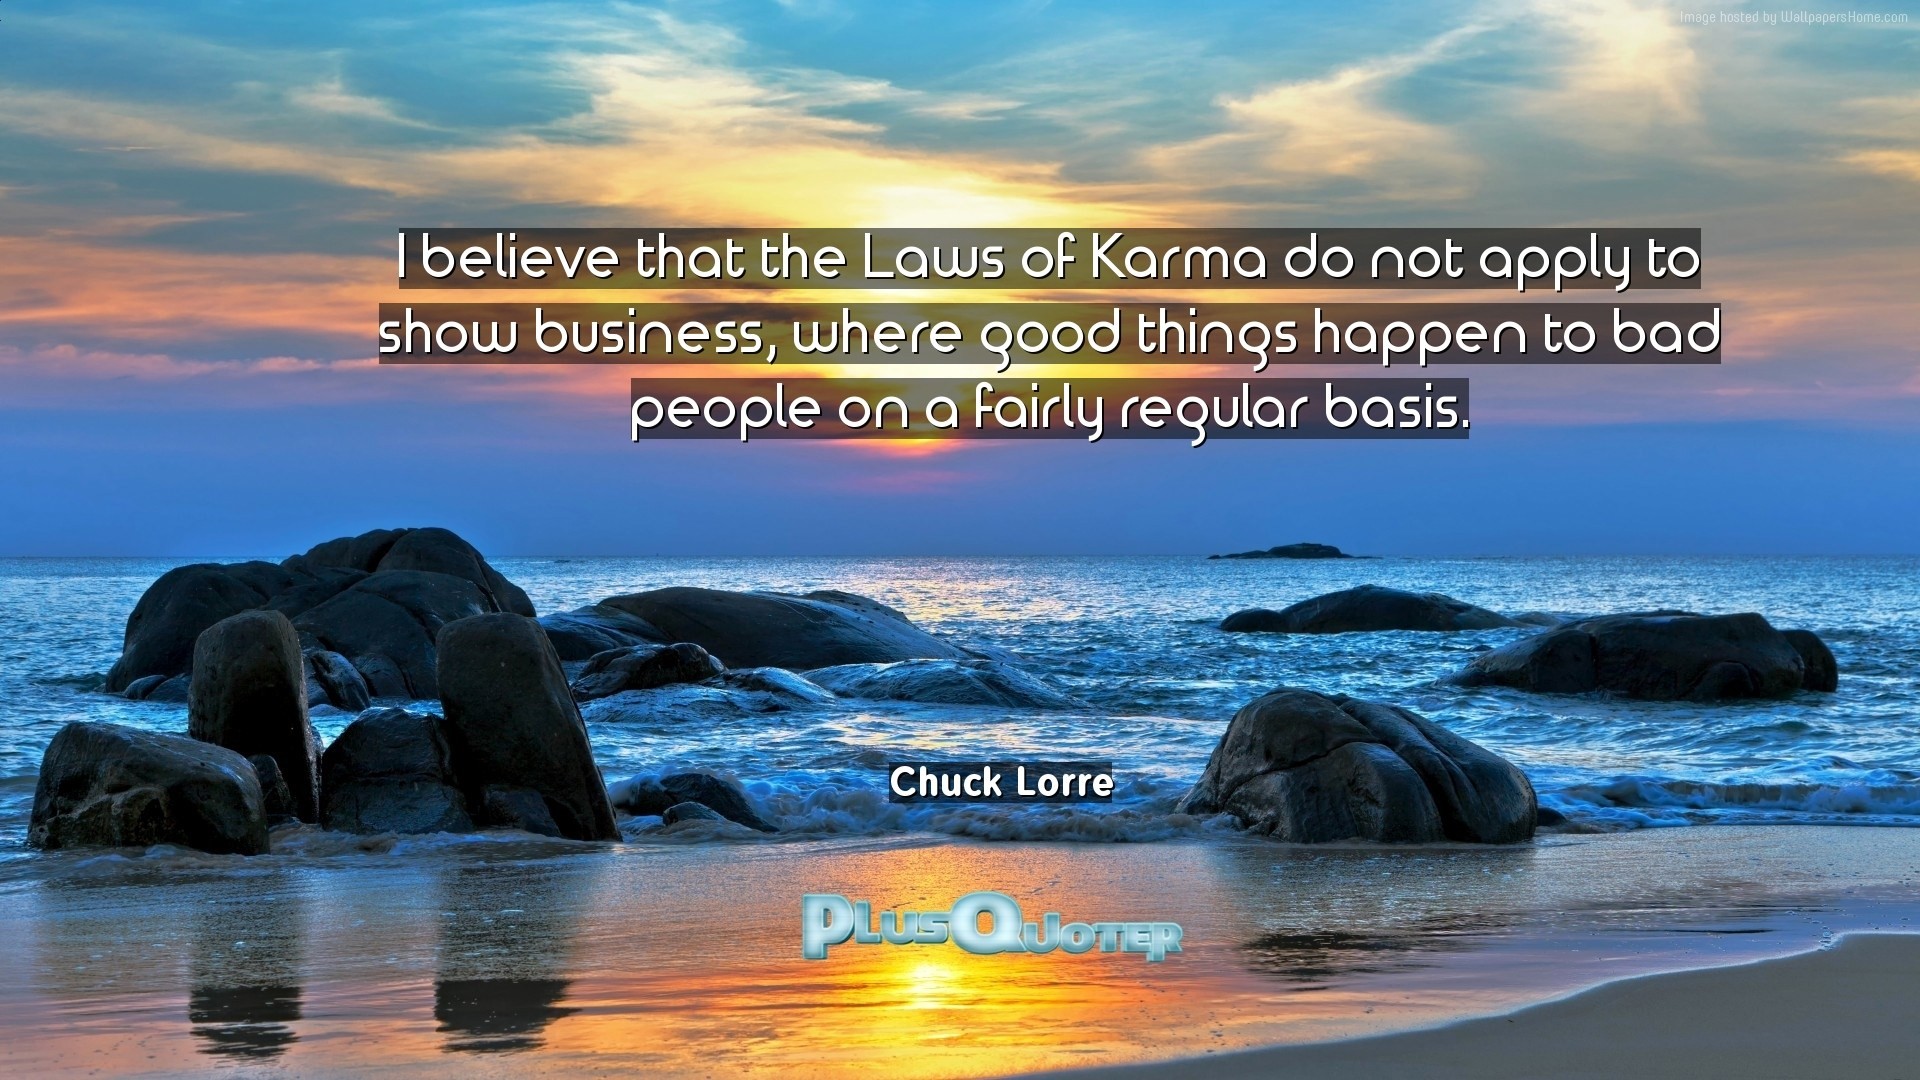 1920x1080 Download Wallpaper with inspirational Quotes- "I believe that the Laws of  Karma do not